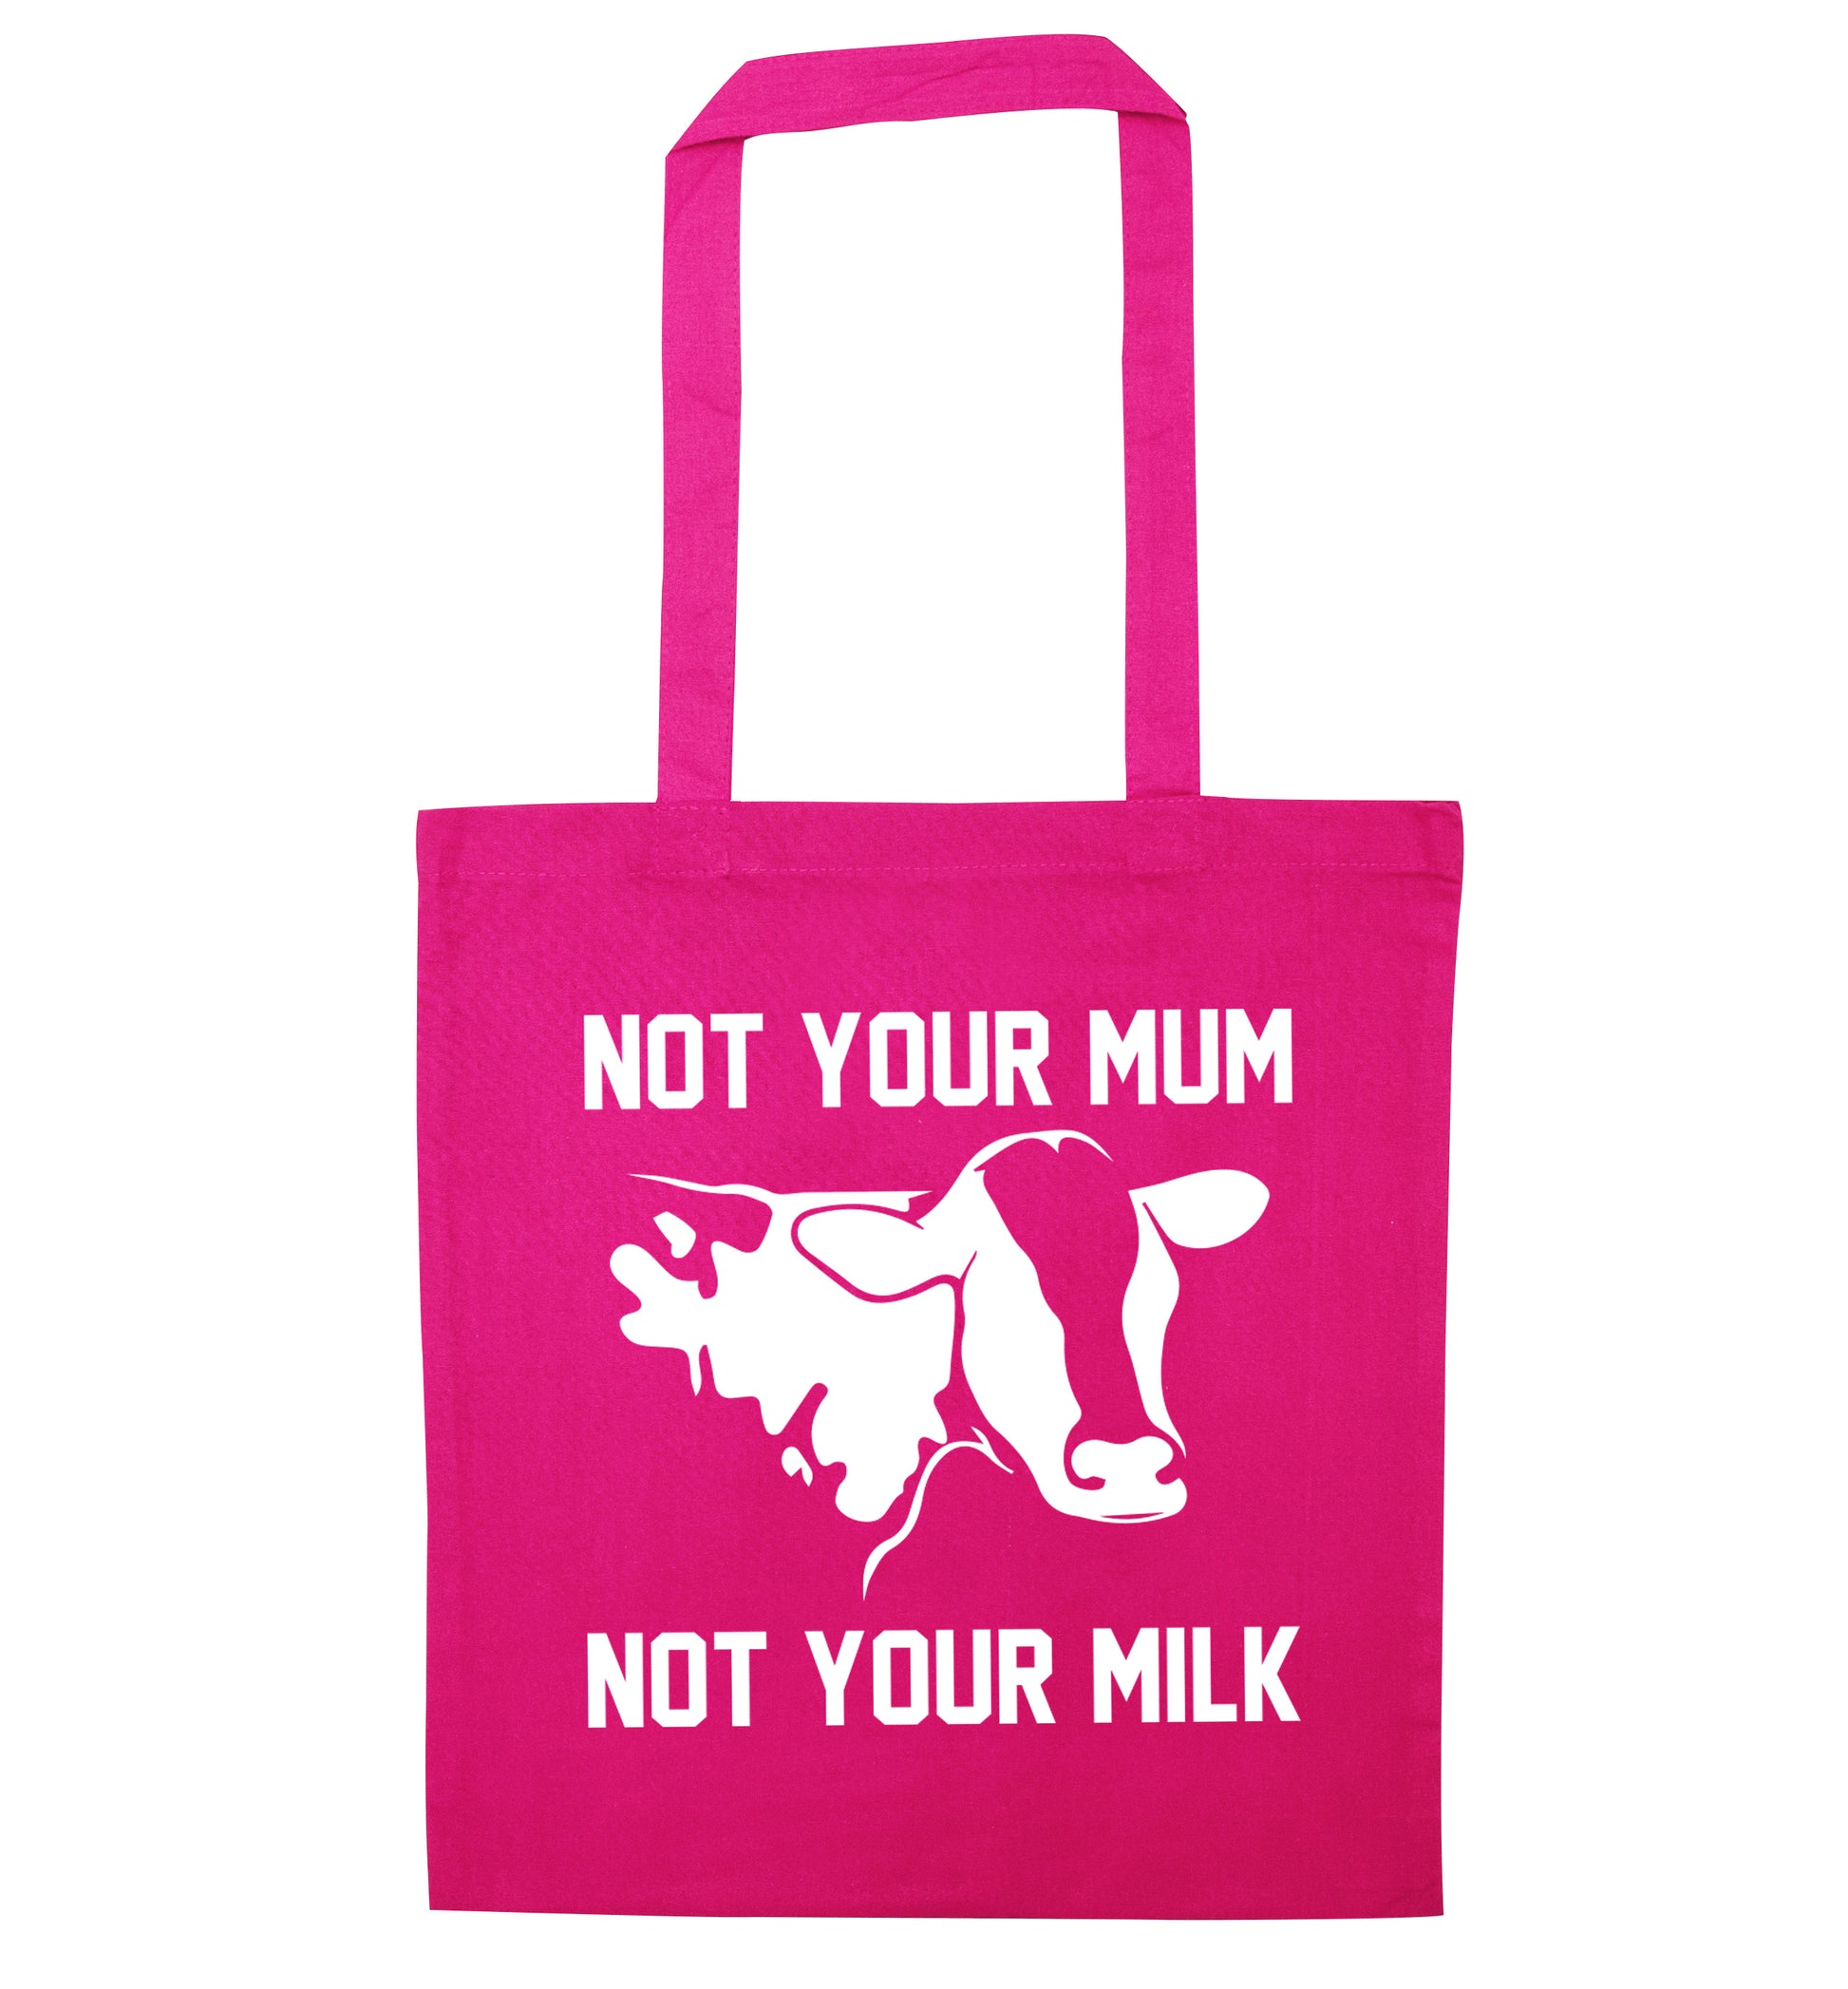 Not your mum not your milk pink tote bag